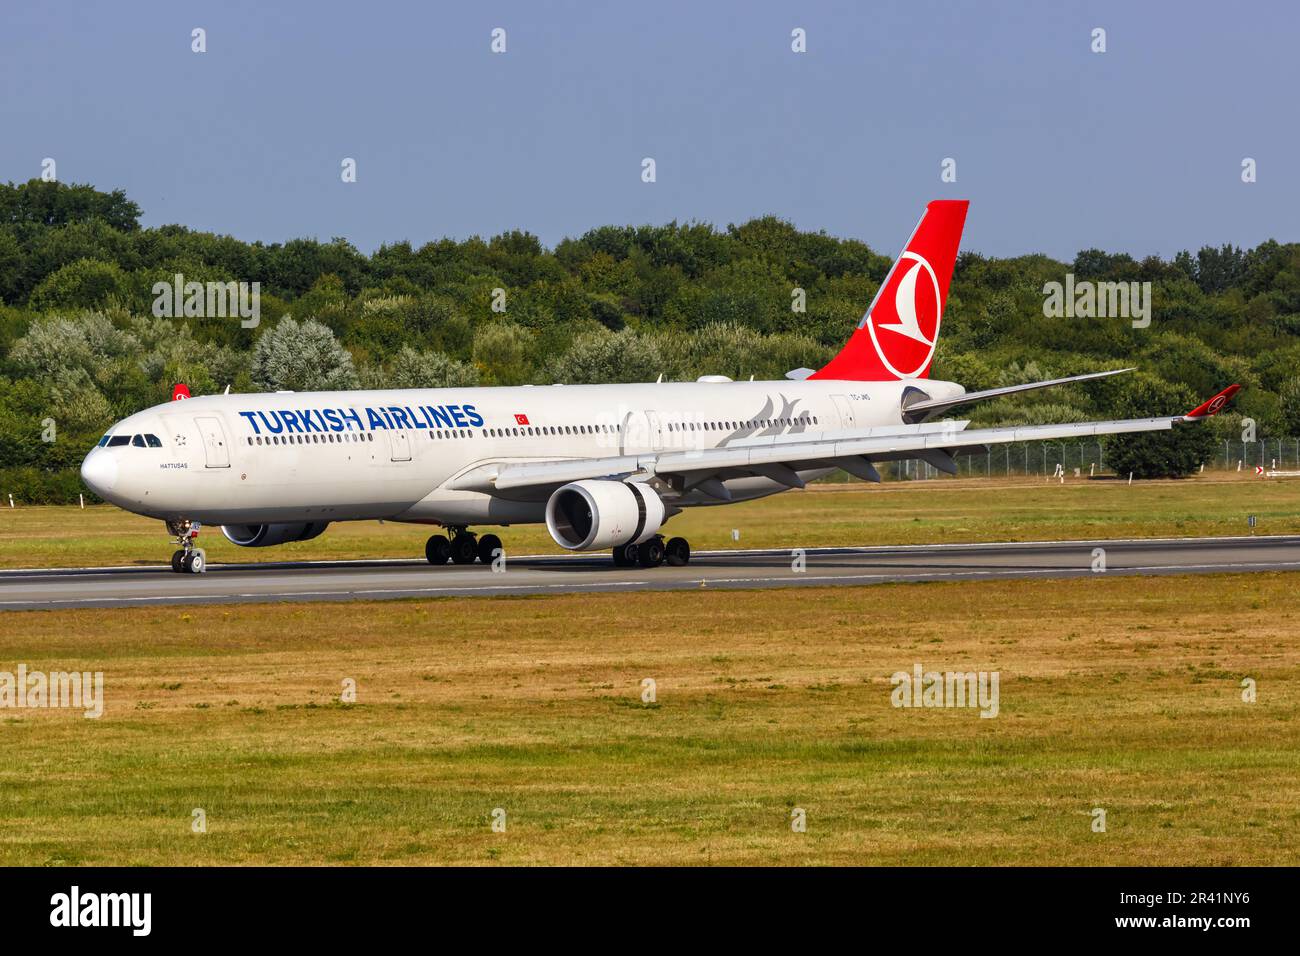 Turkish Airlines Airbus A330-300 aircraft Hamburg airport in Germany Stock Photo